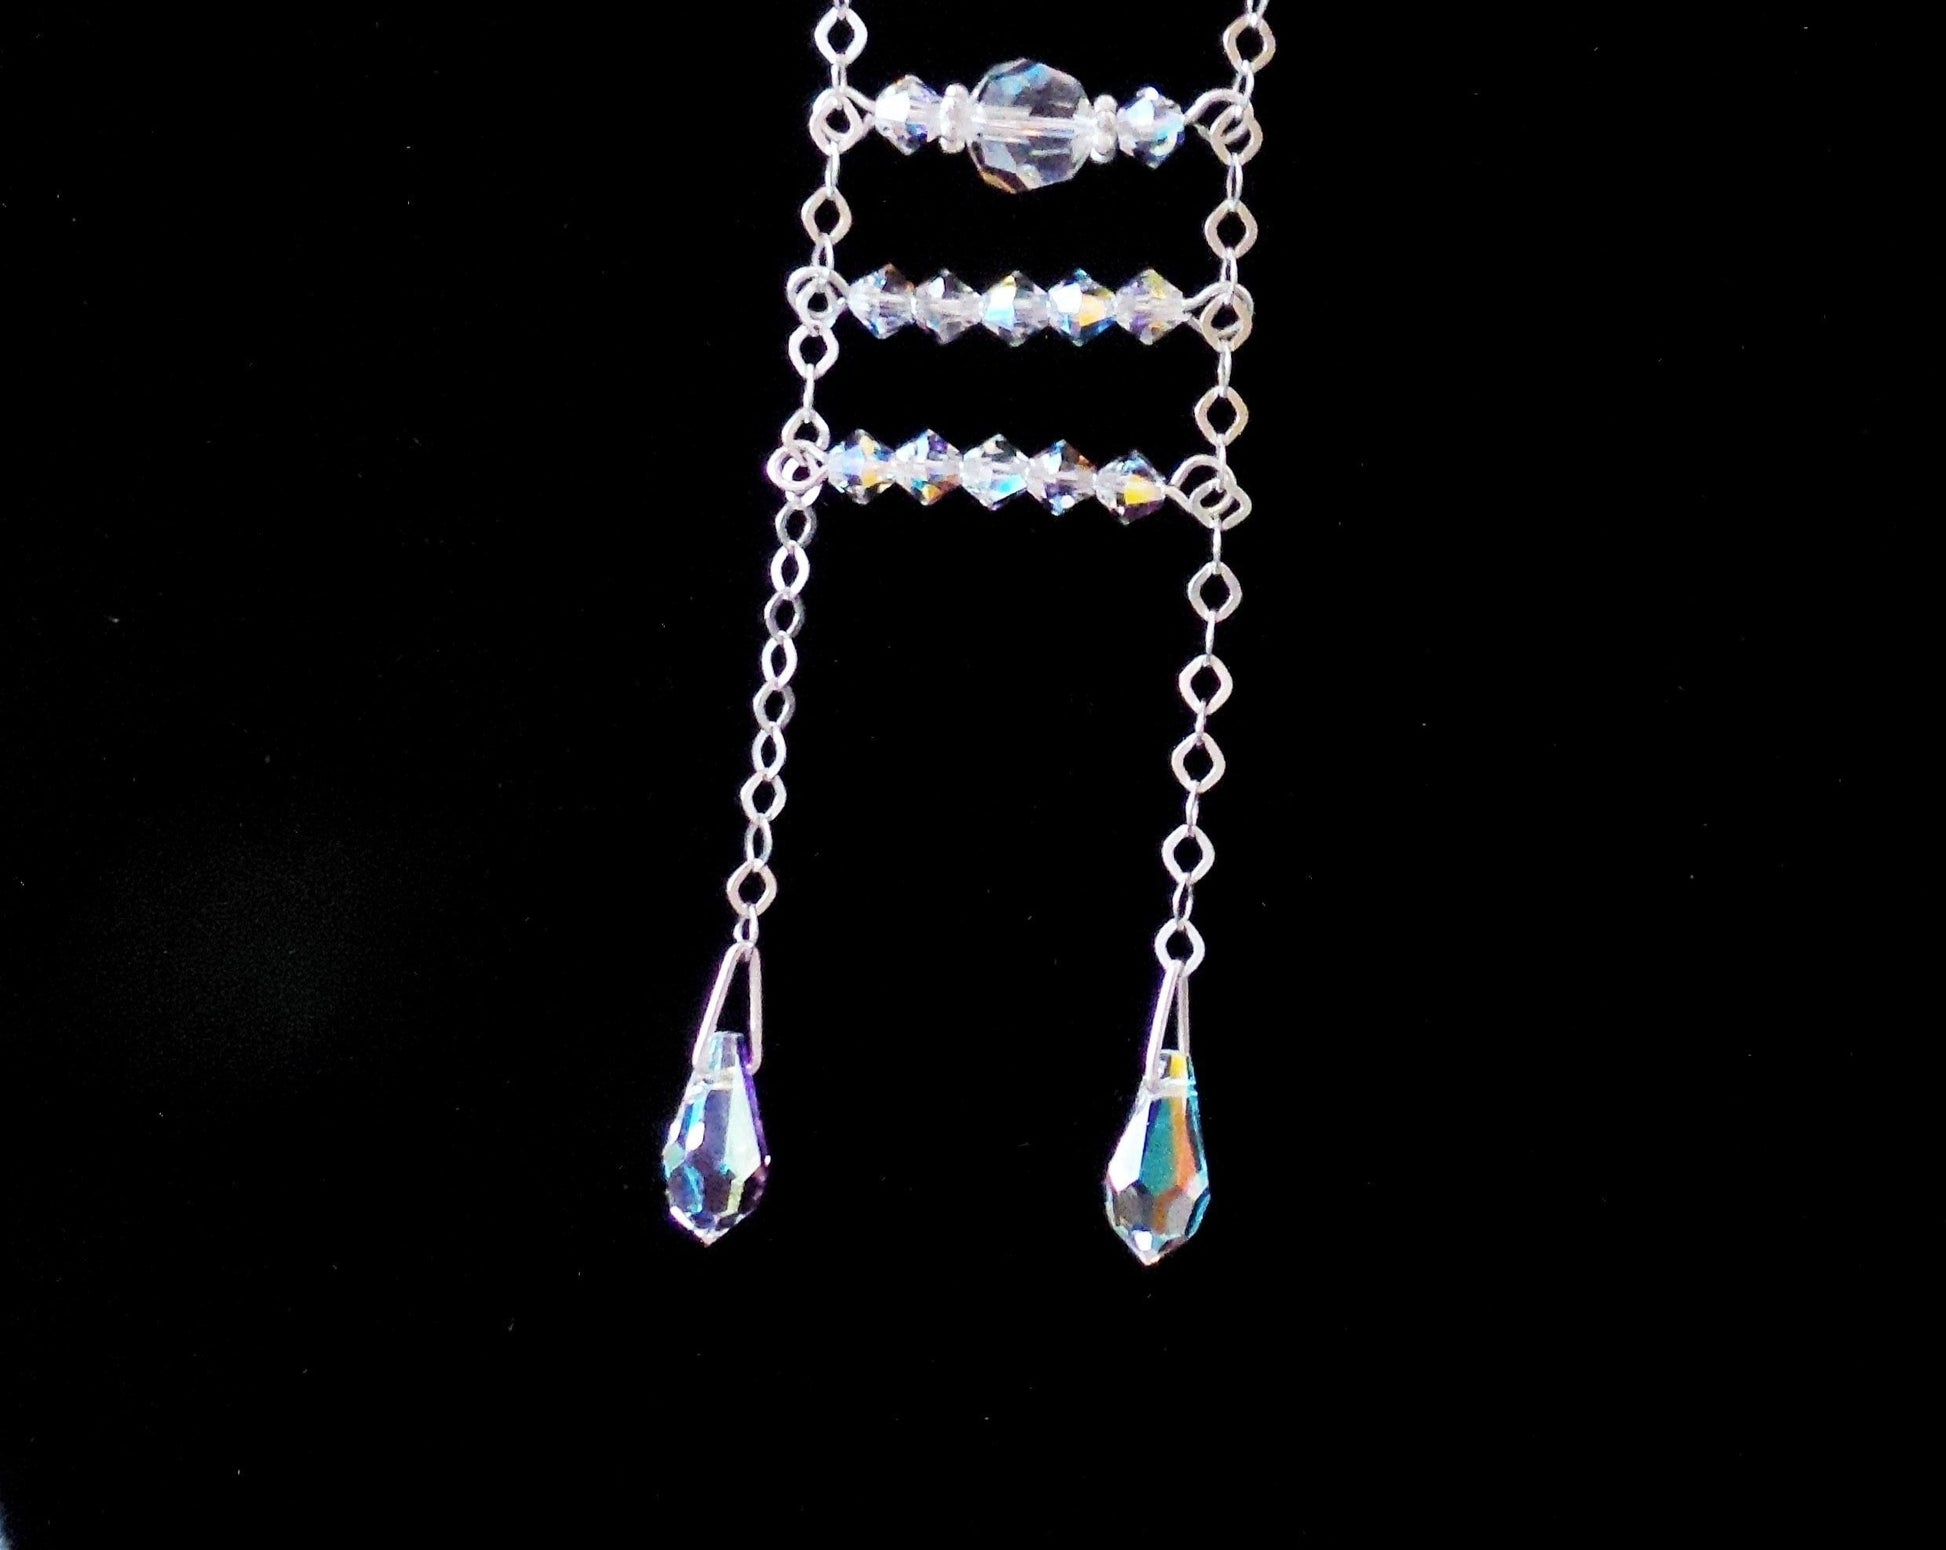  Art Deco Inspired Lariat Crystal Necklace,  A Sterling Silver, Clear AB Crystal Art Deco style Ladder Lariat with long sparkly chain and drop shaped crystals.